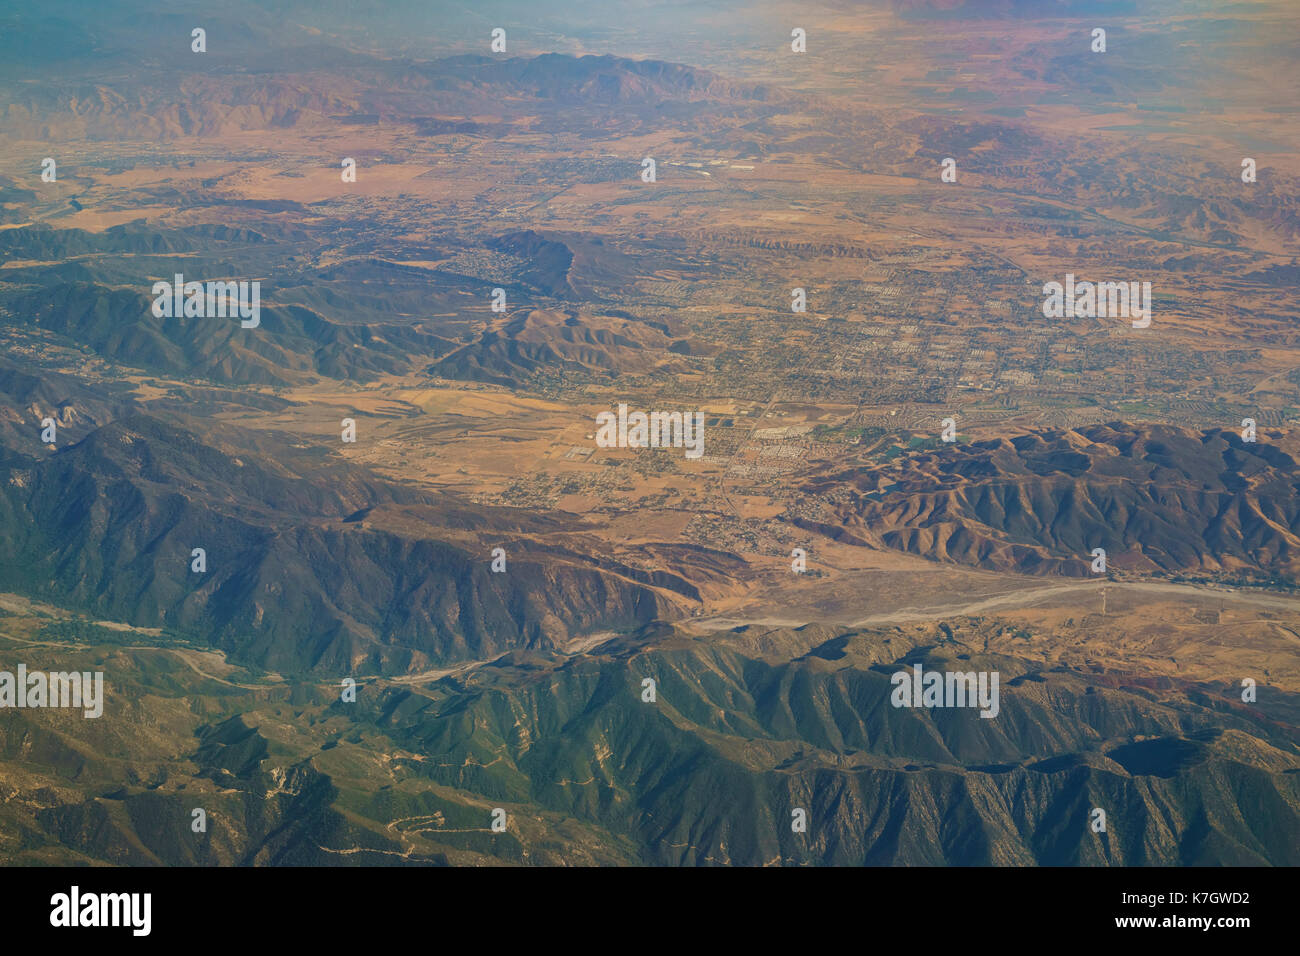 Aerial view of Yucaipa, Cherry Valley, Calimesa, view from window seat in an airplane at California, U.S.A. Stock Photo